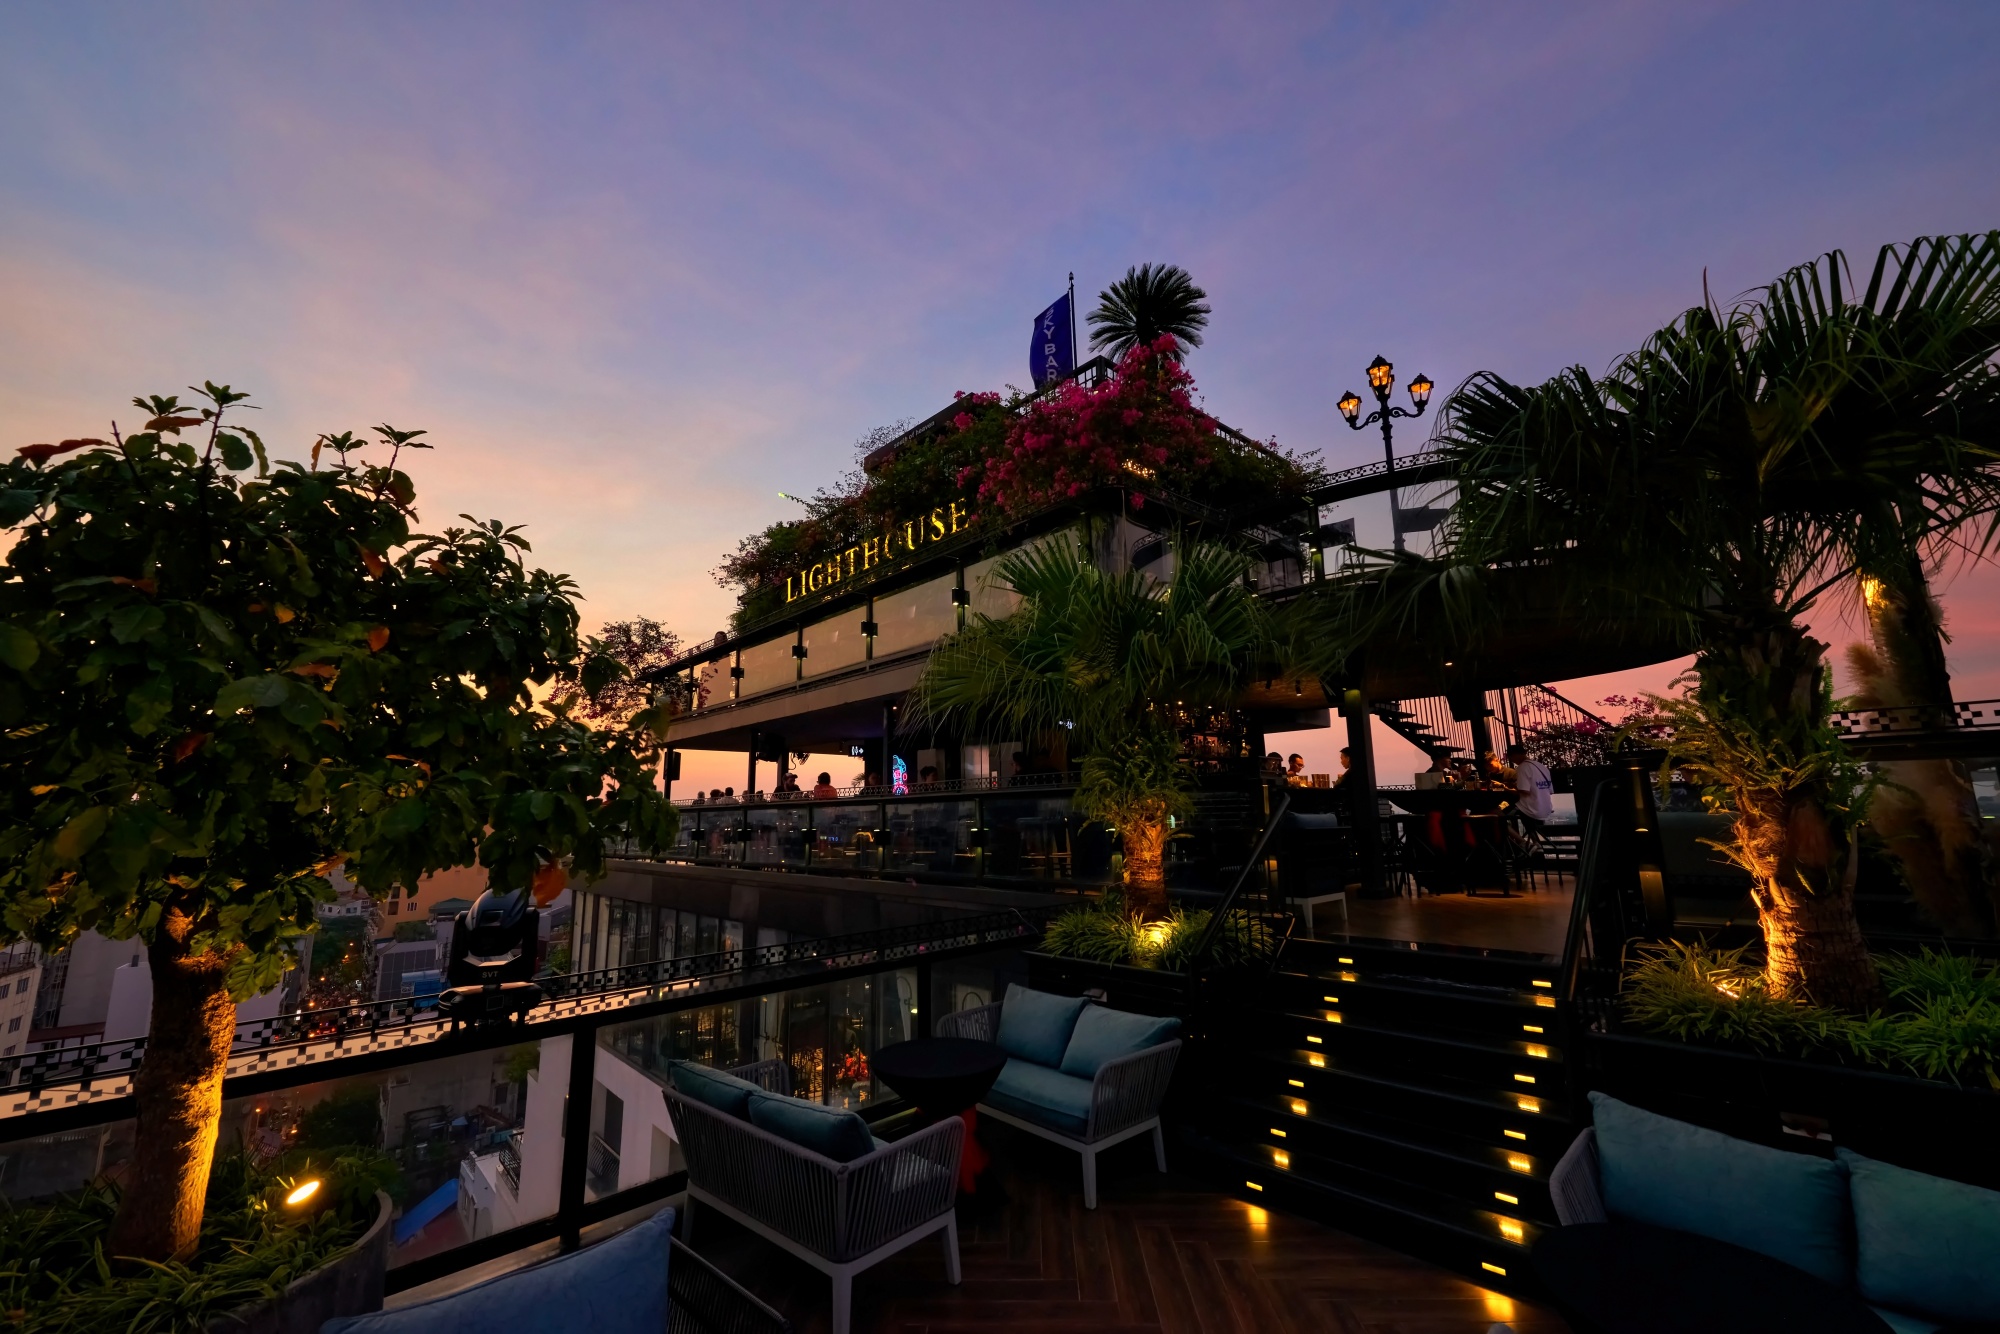 Lighthouse Sky Bar & Restaurant not only serves delicious dishes but also provides an incredible panoramic view of the city